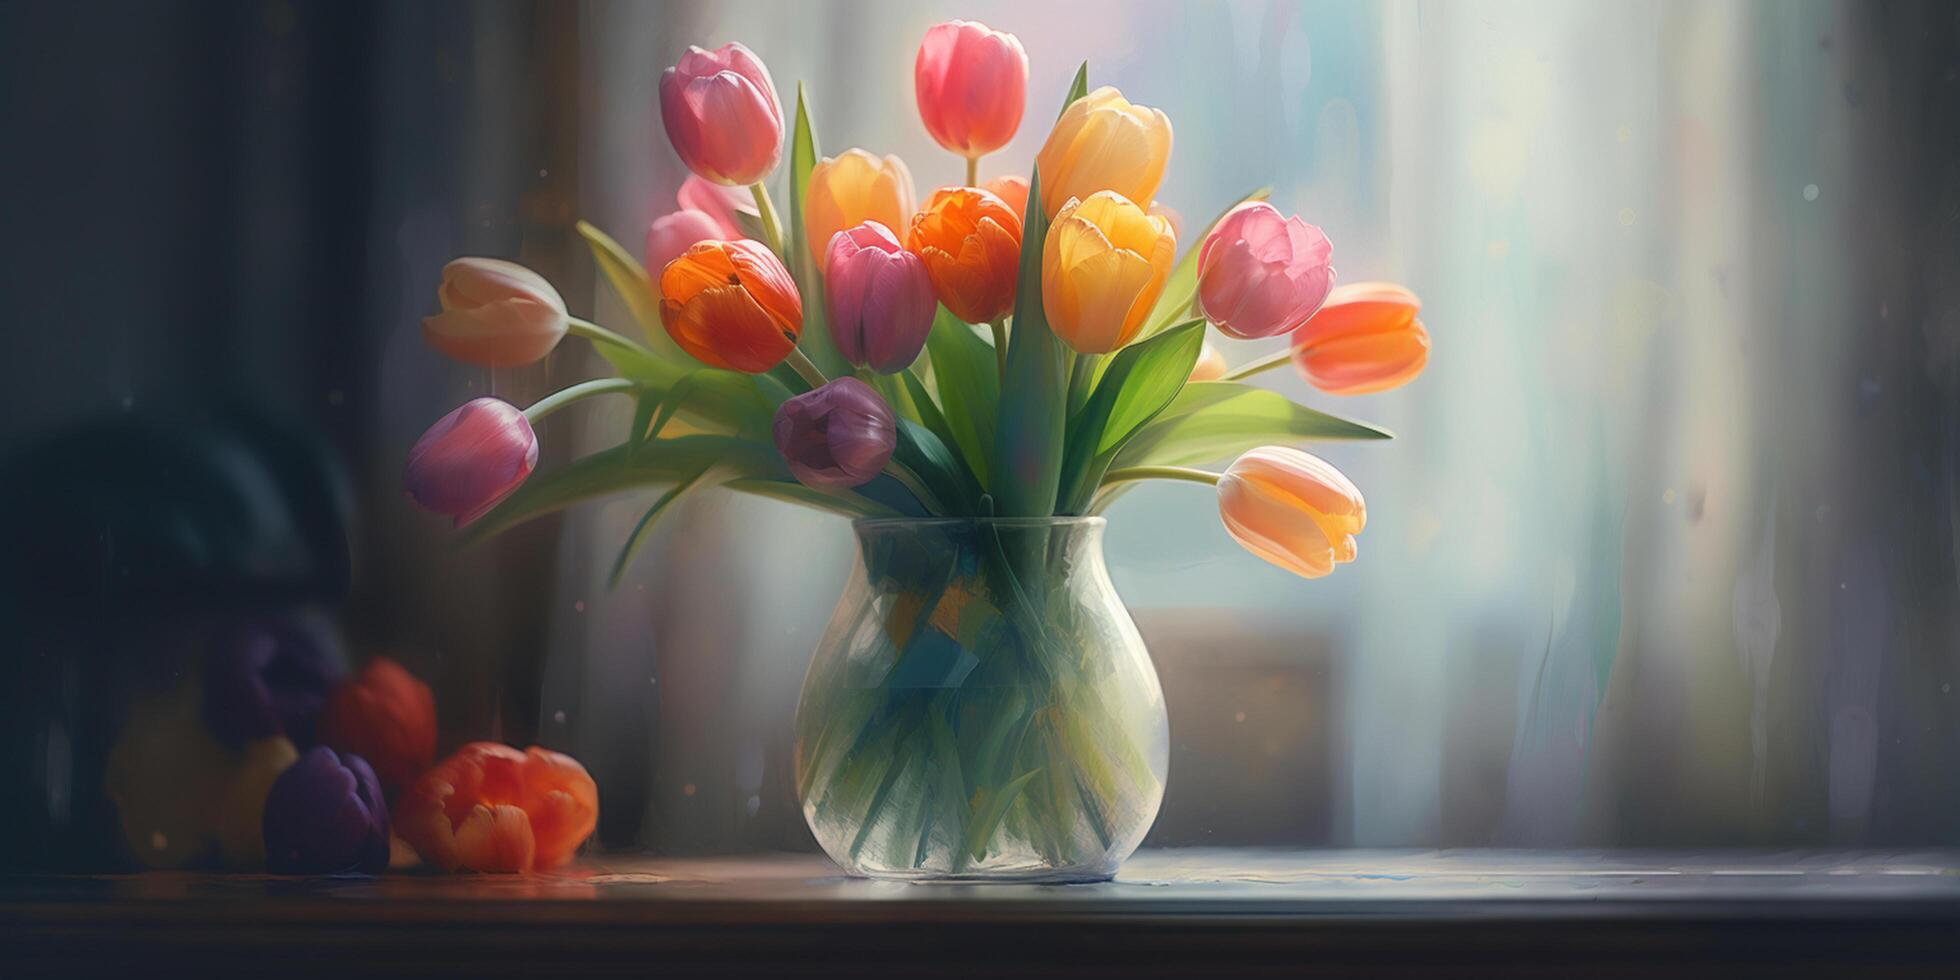 Vase of Tulips A Watercolor Still Life Painting photo